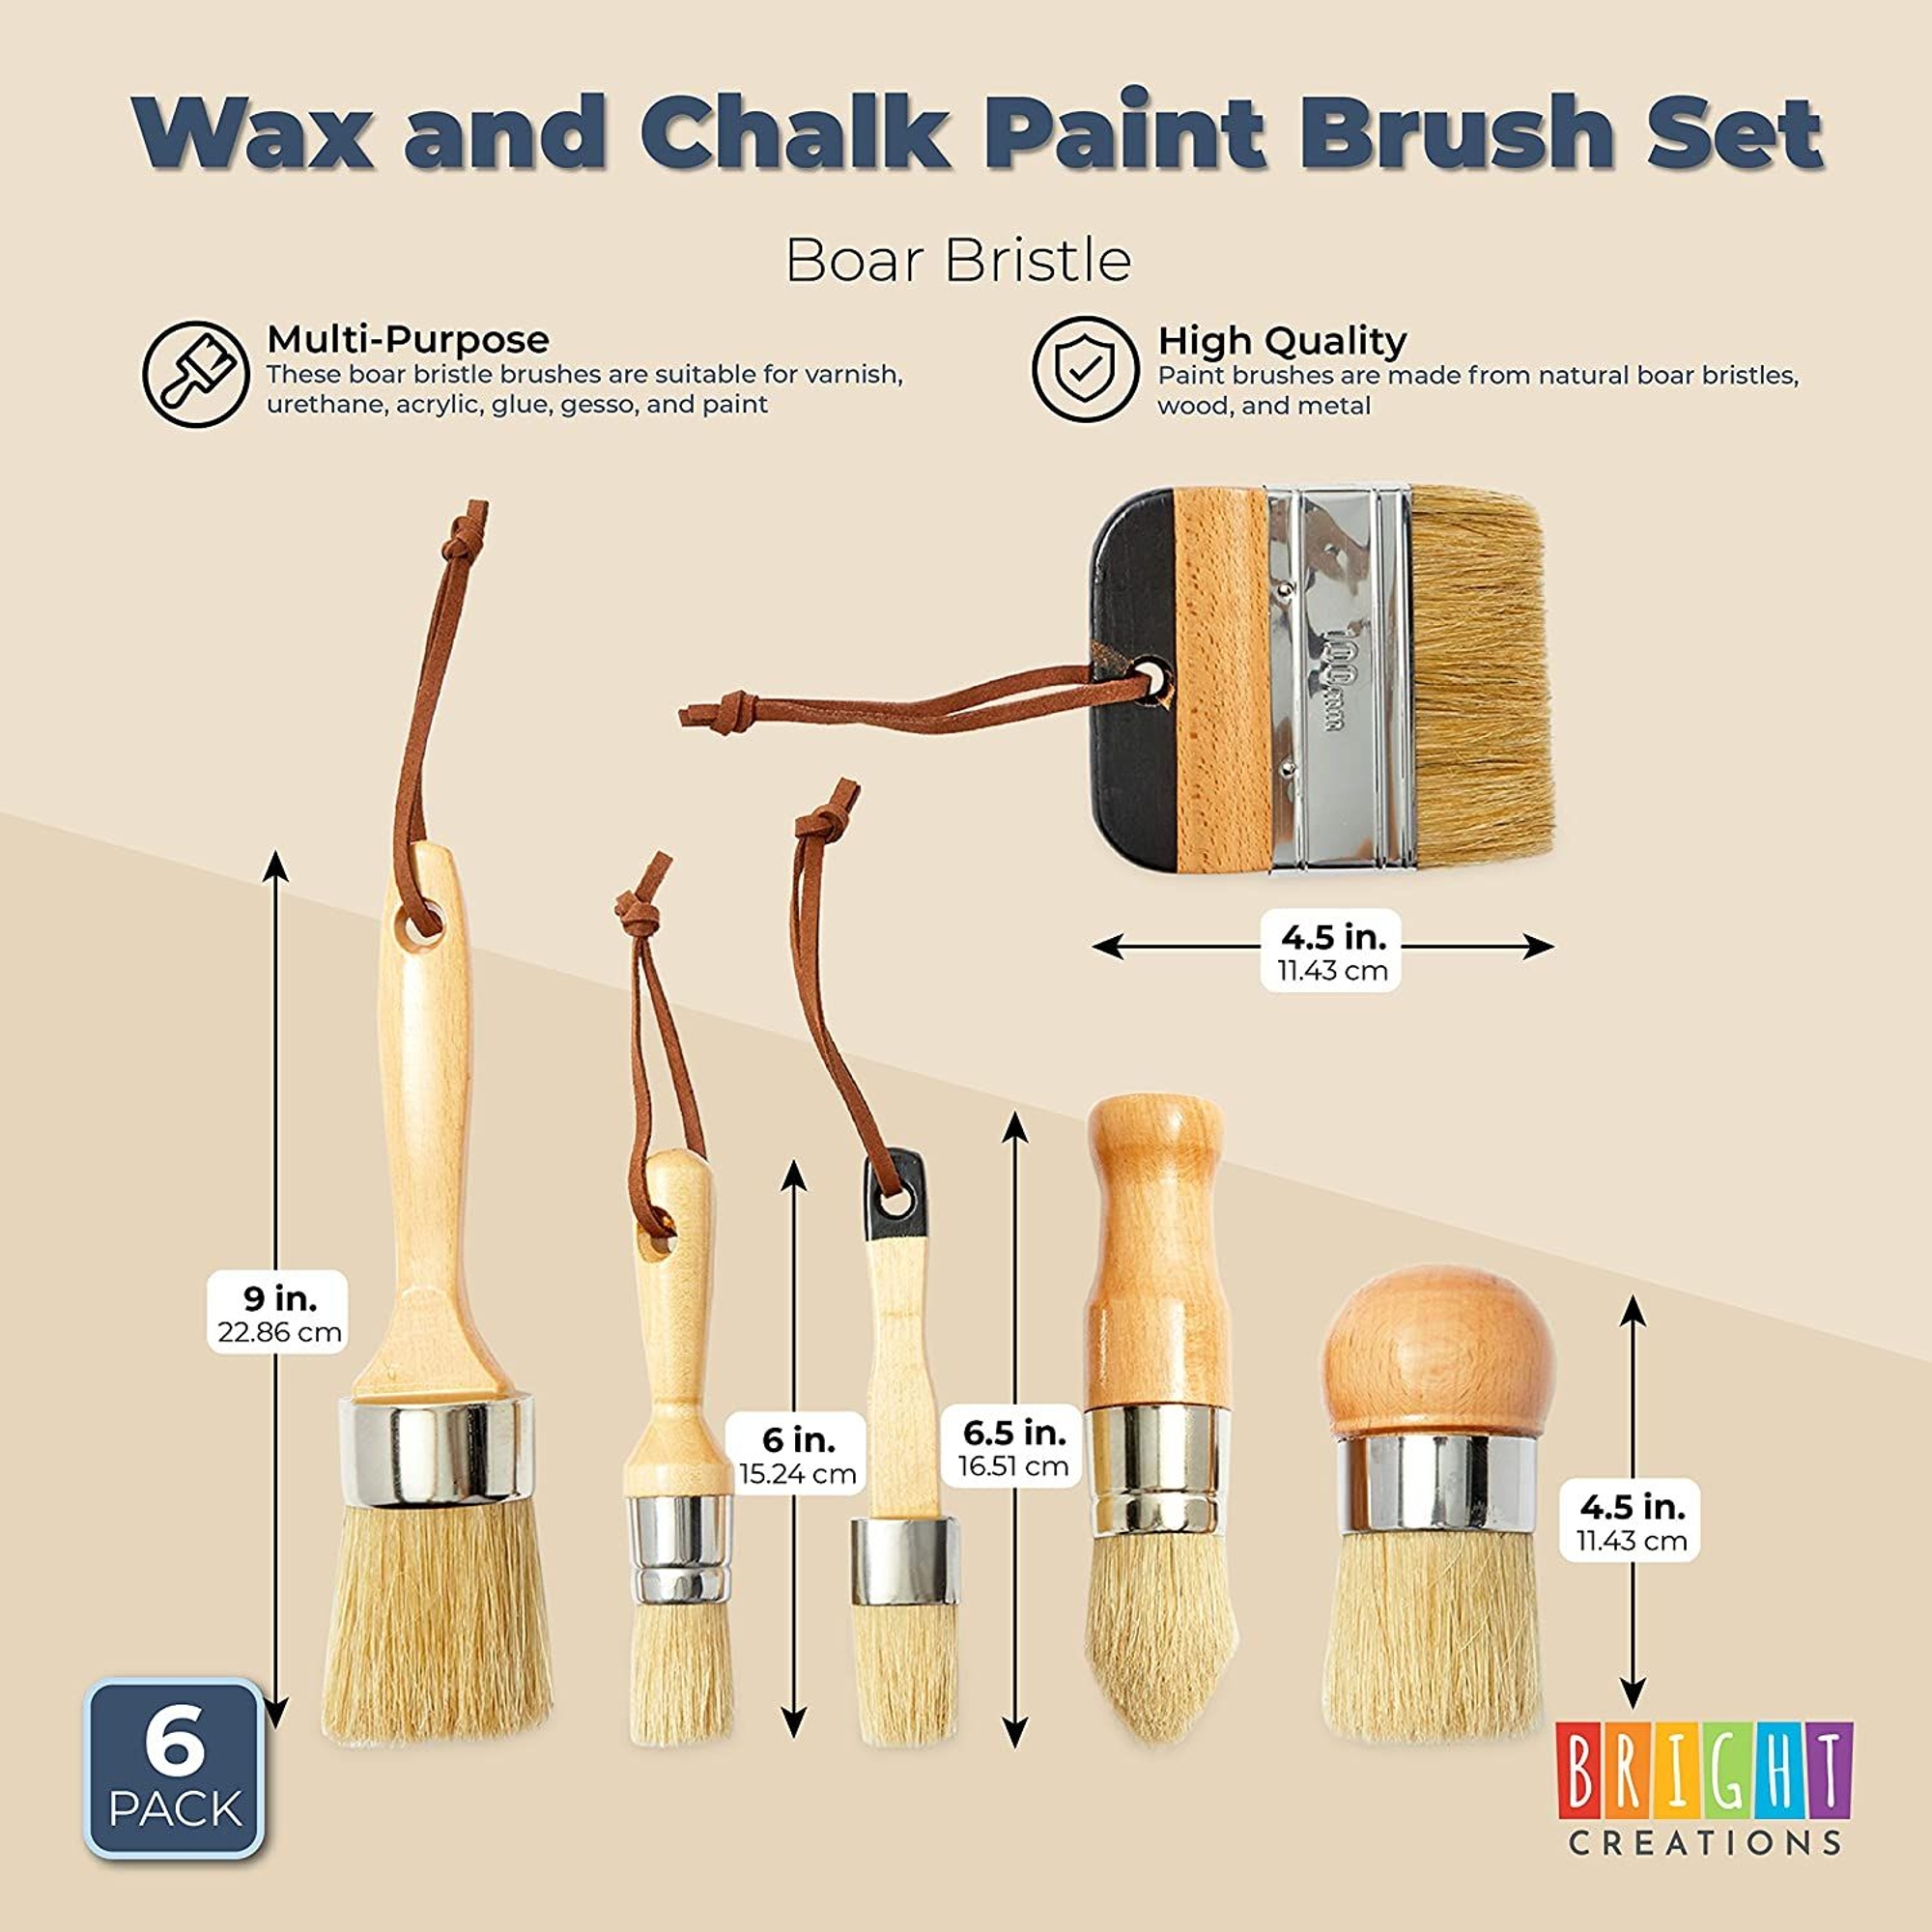 6 Pieces Chalk Paint Brush Set, Chalk Paint Brushes for Furniture, Wax  Brush Boar Bristle for Home Decor 